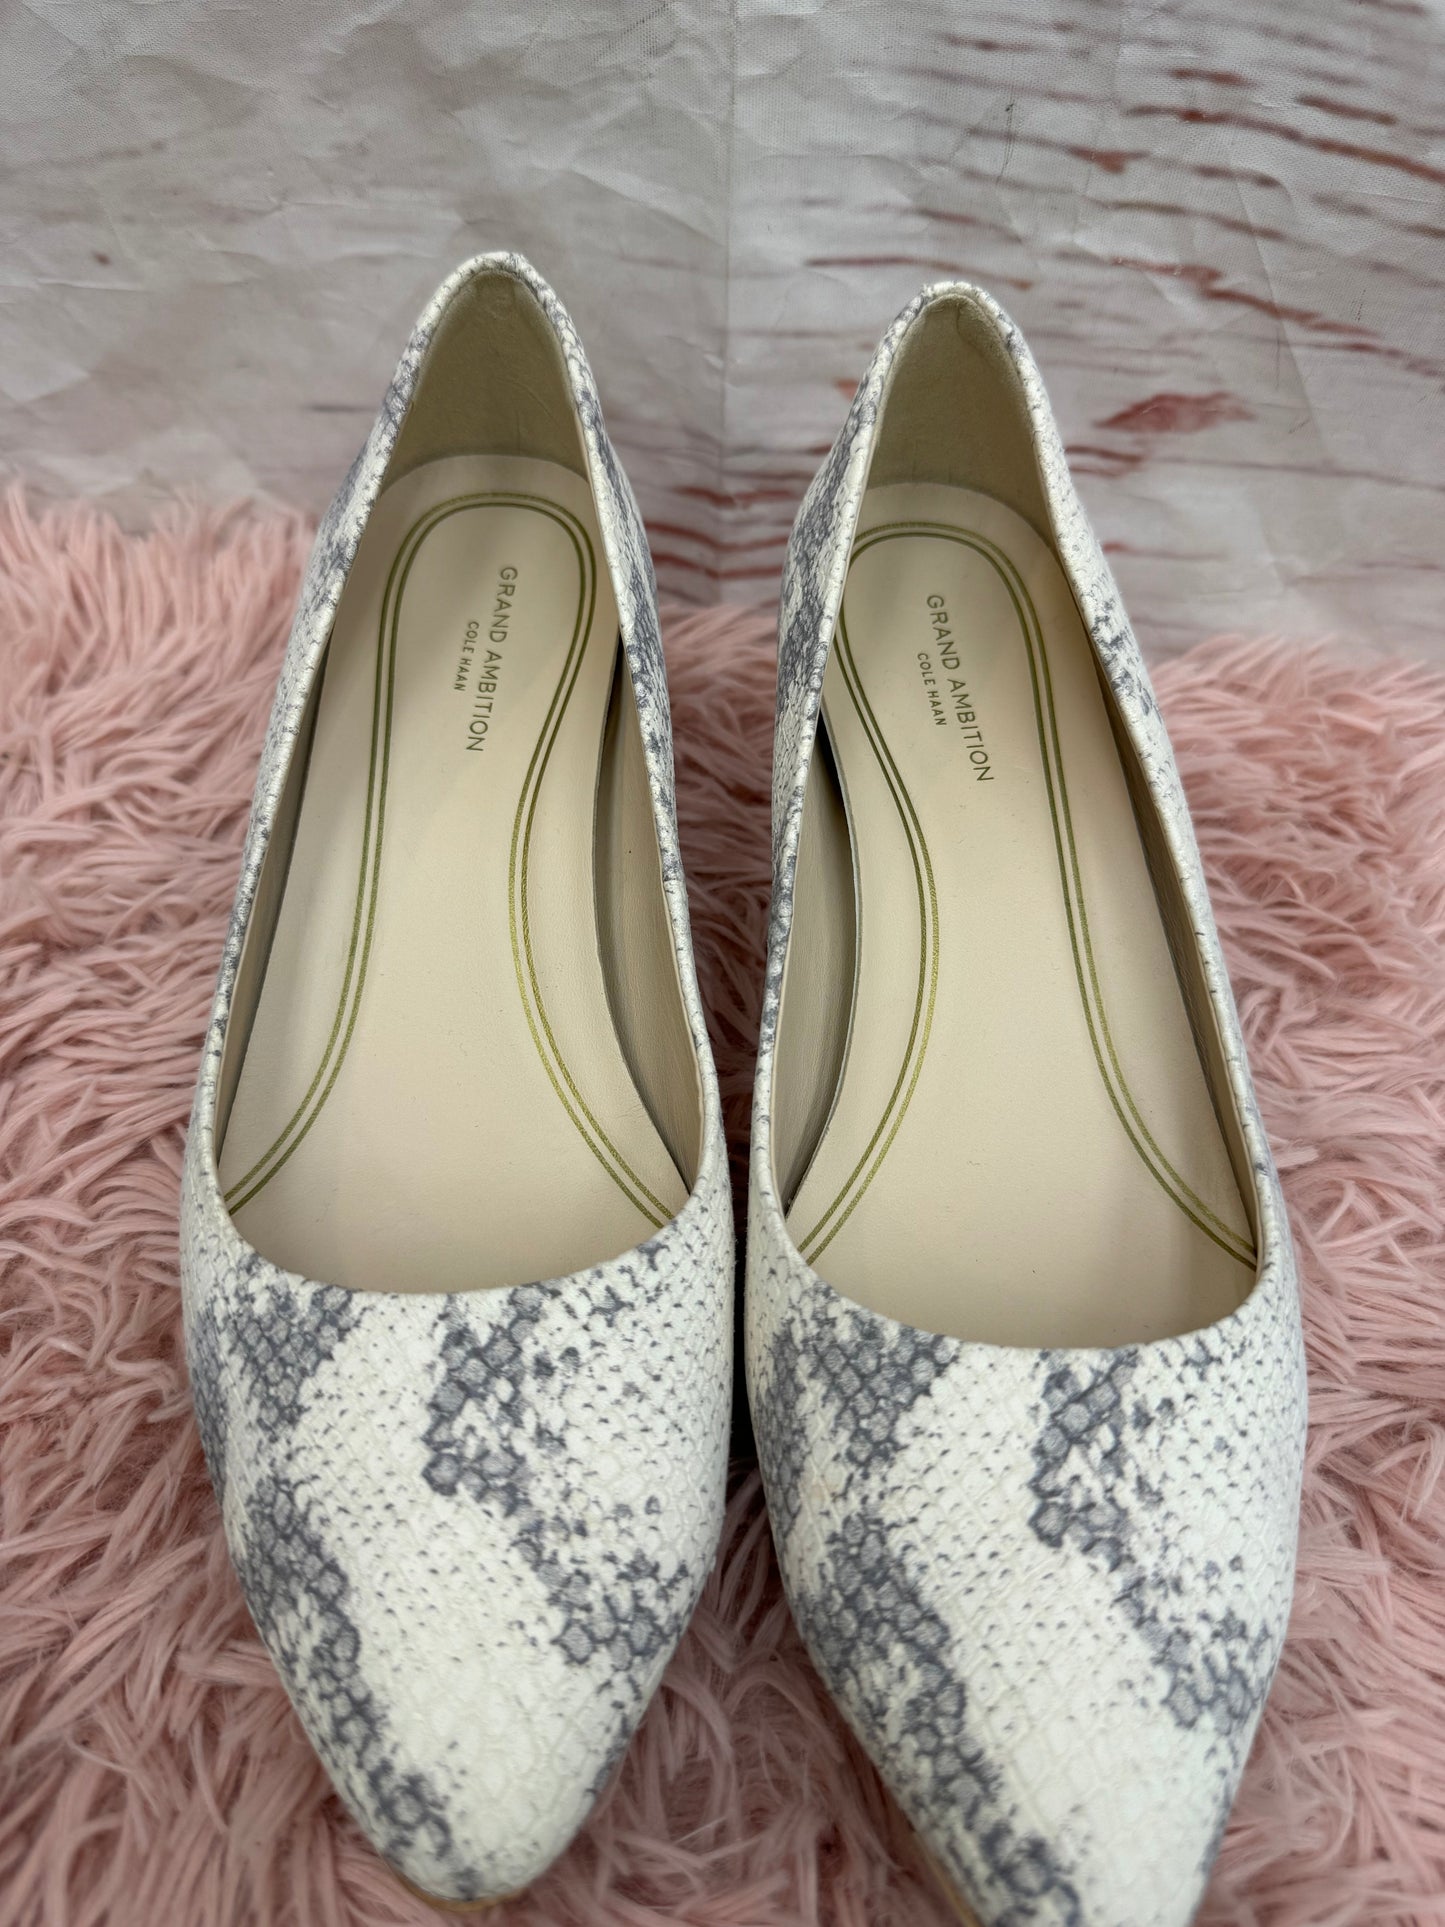 Shoes Heels Wedge By Cole-haan  Size: 8.5